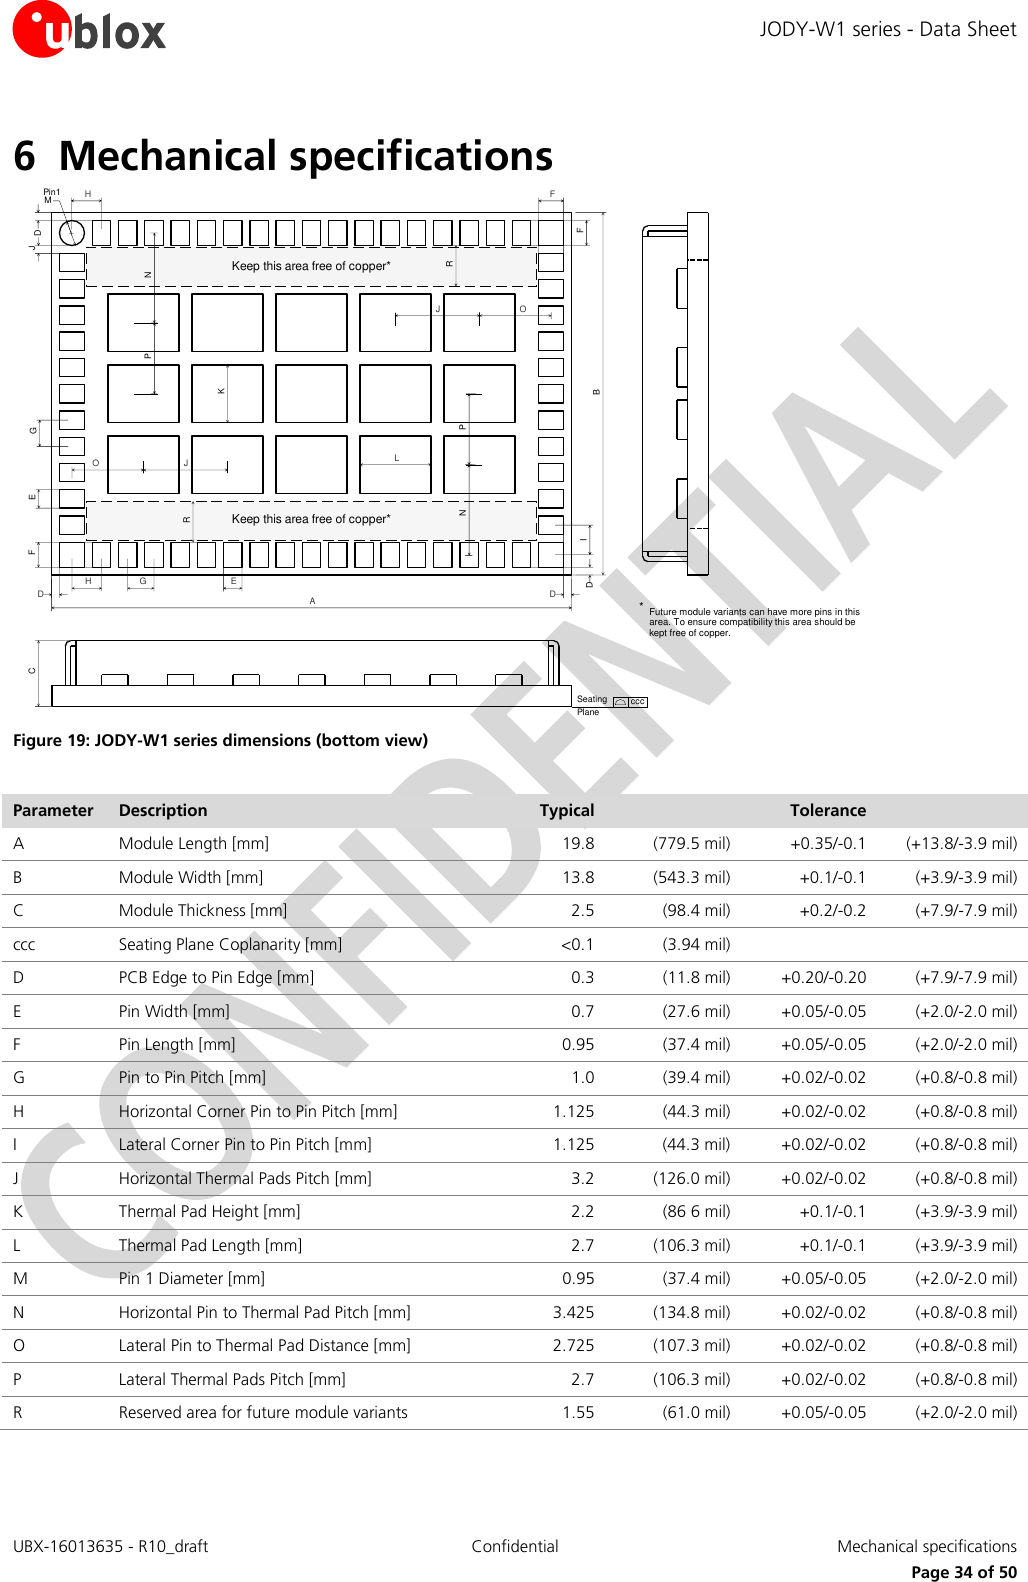 JODY-W1 series - Data Sheet UBX-16013635 - R10_draft Confidential  Mechanical specifications     Page 34 of 50 6 Mechanical specifications     Figure 19: JODY-W1 series dimensions (bottom view)  Parameter Description Typical  Tolerance  A  Module Length [mm] 19.8 (779.5 mil) +0.35/-0.1 (+13.8/-3.9 mil) B Module Width [mm] 13.8 (543.3 mil) +0.1/-0.1 (+3.9/-3.9 mil) C Module Thickness [mm] 2.5 (98.4 mil) +0.2/-0.2 (+7.9/-7.9 mil) ccc Seating Plane Coplanarity [mm] &lt;0.1 (3.94 mil)   D PCB Edge to Pin Edge [mm] 0.3 (11.8 mil) +0.20/-0.20 (+7.9/-7.9 mil) E Pin Width [mm]  0.7 (27.6 mil) +0.05/-0.05 (+2.0/-2.0 mil) F Pin Length [mm] 0.95 (37.4 mil) +0.05/-0.05 (+2.0/-2.0 mil) G Pin to Pin Pitch [mm] 1.0 (39.4 mil) +0.02/-0.02 (+0.8/-0.8 mil) H Horizontal Corner Pin to Pin Pitch [mm] 1.125 (44.3 mil) +0.02/-0.02 (+0.8/-0.8 mil) I Lateral Corner Pin to Pin Pitch [mm] 1.125 (44.3 mil)  +0.02/-0.02 (+0.8/-0.8 mil) J Horizontal Thermal Pads Pitch [mm] 3.2 (126.0 mil) +0.02/-0.02 (+0.8/-0.8 mil) K Thermal Pad Height [mm] 2.2 (86 6 mil) +0.1/-0.1 (+3.9/-3.9 mil) L Thermal Pad Length [mm] 2.7 (106.3 mil) +0.1/-0.1 (+3.9/-3.9 mil) M Pin 1 Diameter [mm]  0.95 (37.4 mil) +0.05/-0.05 (+2.0/-2.0 mil) N Horizontal Pin to Thermal Pad Pitch [mm] 3.425 (134.8 mil) +0.02/-0.02 (+0.8/-0.8 mil) O Lateral Pin to Thermal Pad Distance [mm] 2.725 (107.3 mil) +0.02/-0.02 (+0.8/-0.8 mil) P Lateral Thermal Pads Pitch [mm] 2.7 (106.3 mil) +0.02/-0.02 (+0.8/-0.8 mil) R Reserved area for future module variants 1.55 (61.0 mil) +0.05/-0.05 (+2.0/-2.0 mil) DEFHDD      OGGEDAIBFFLKMJSeatingcccPlaneCHPin1J  PNPNOJKeep this area free of copper*Keep this area free of copper*RR*Future module variants can have more pins in this area. To ensure compatibility this area should be kept free of copper. 